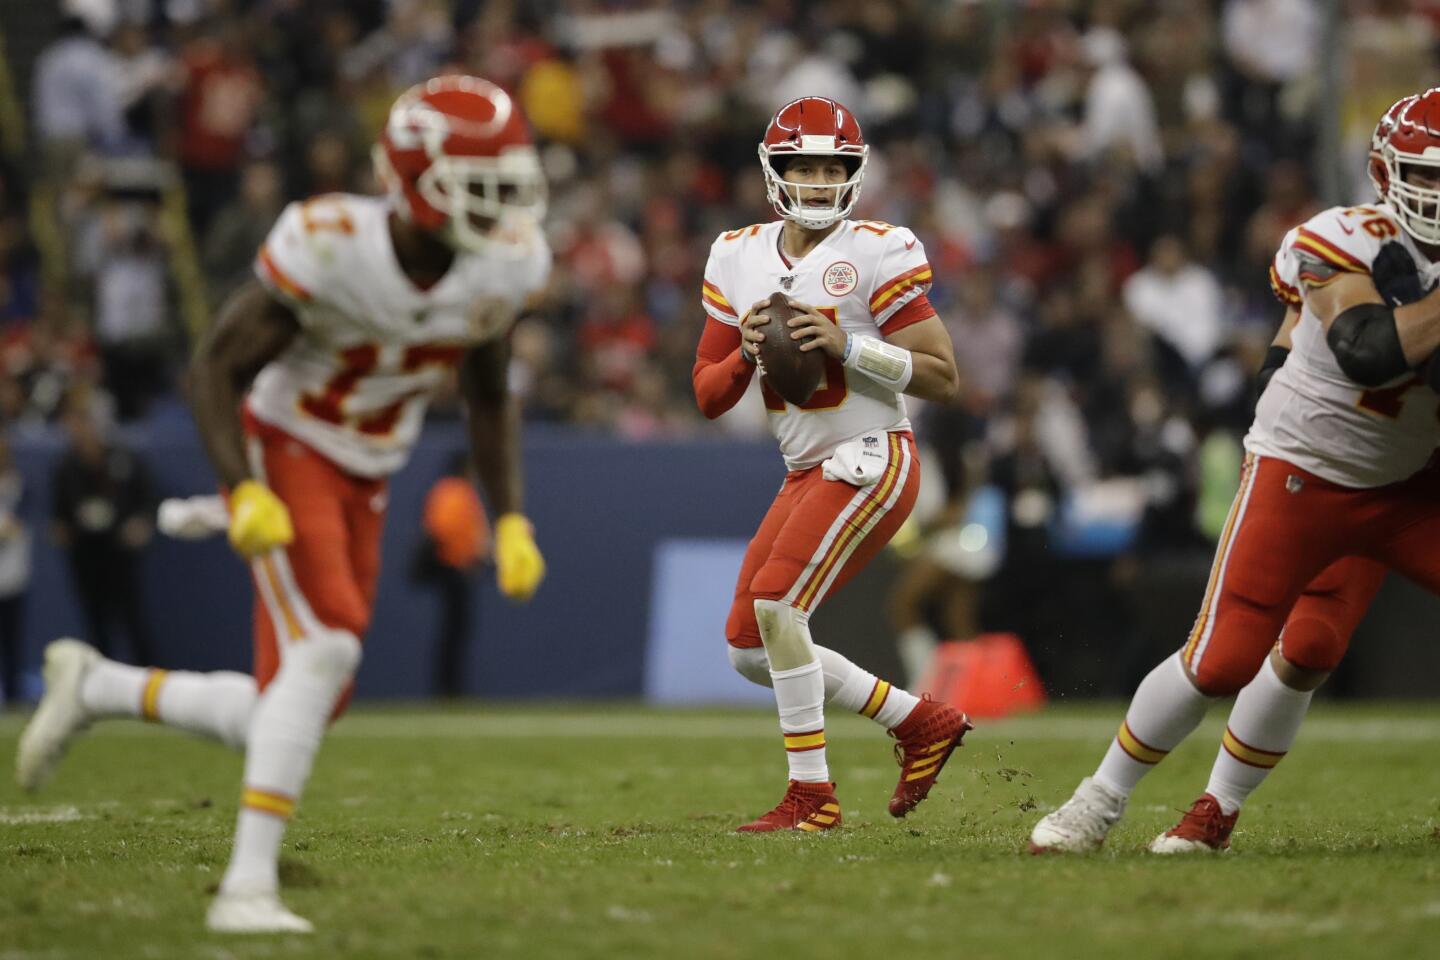 Chiefs quarterback Patrick Mahomes looks to pass during the first half of a game against the Chargers on Nov. 18 at Estadio Azteca in Mexico City.